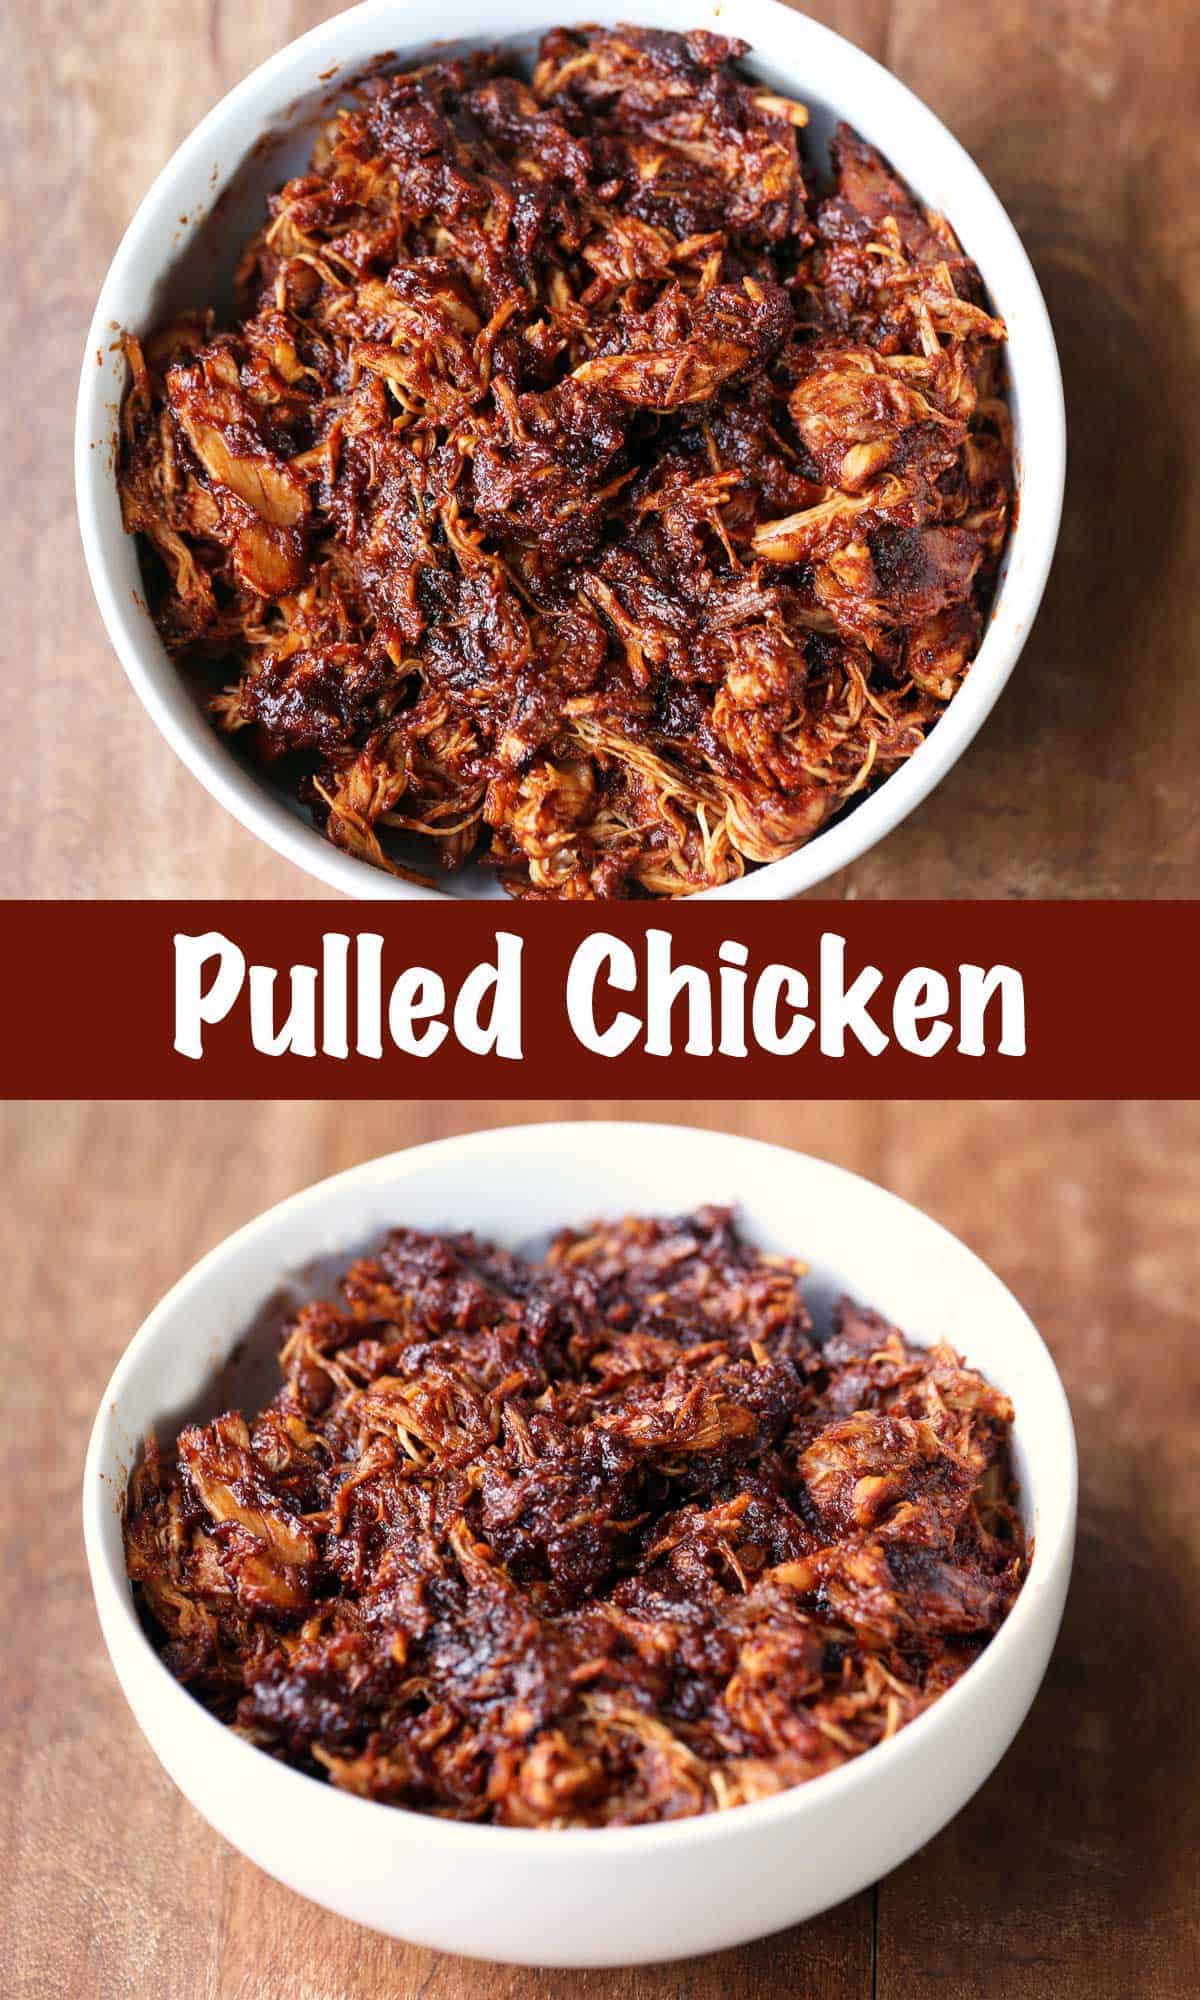 A two-photo collage of pulled chicken served in a white bowl.  